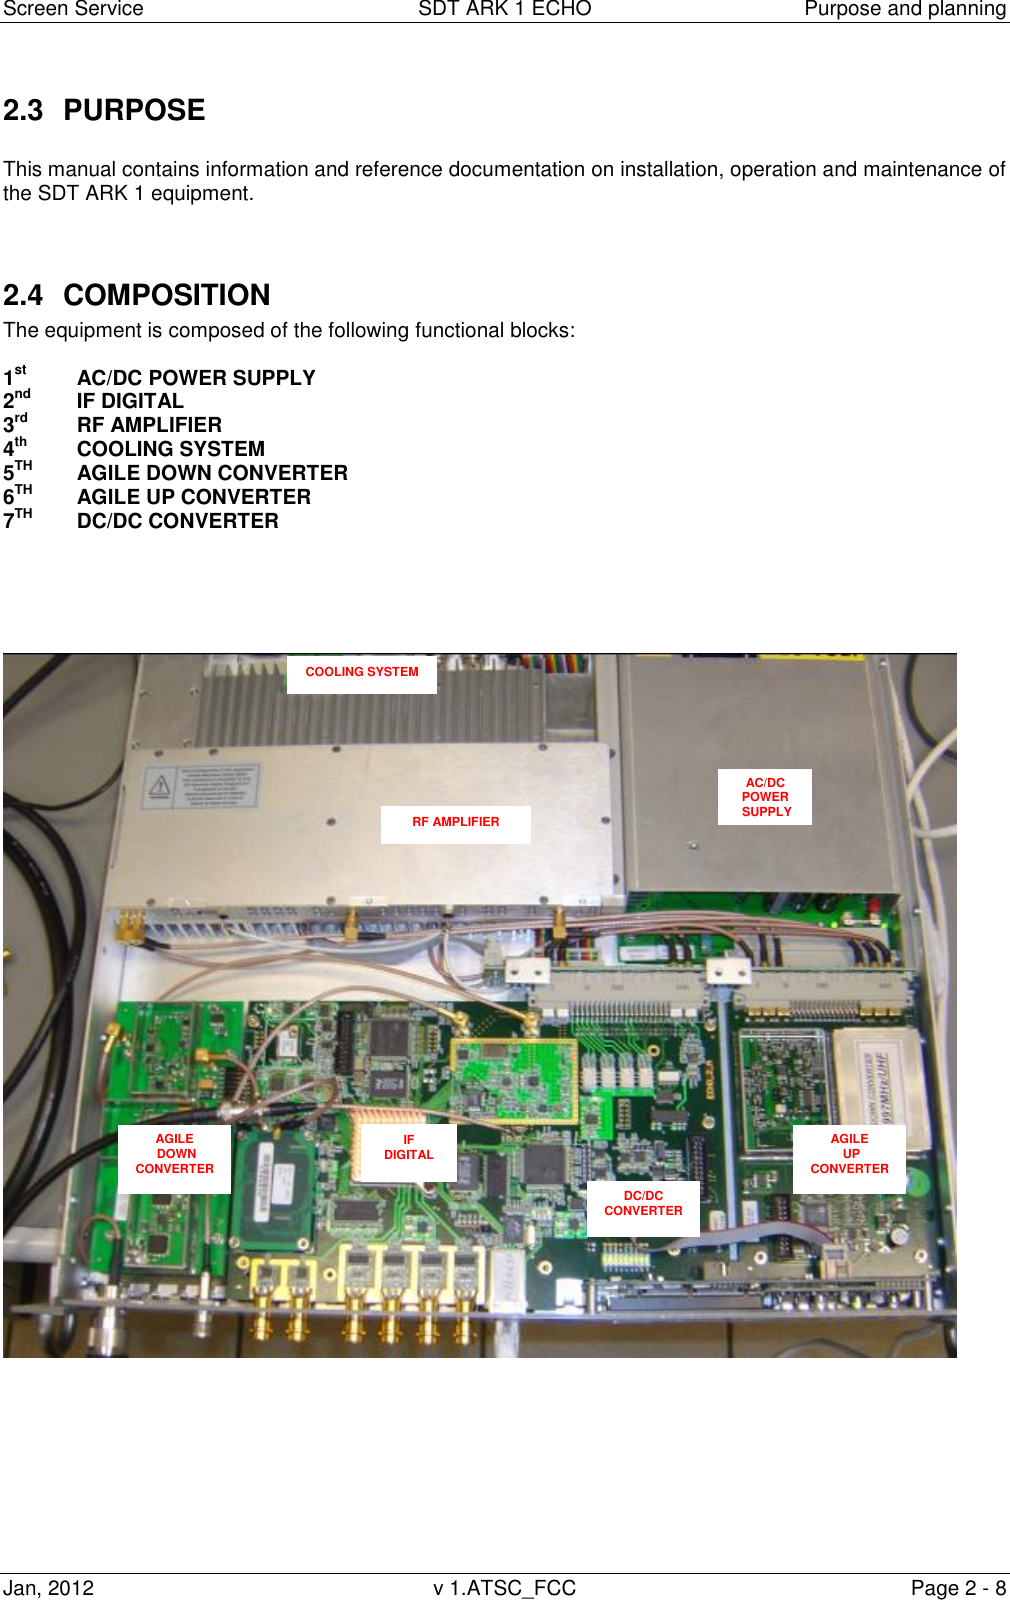 Screen Service  SDT ARK 1 ECHO  Purpose and planning Jan, 2012  v 1.ATSC_FCC  Page 2 - 8 2.3  PURPOSE  This manual contains information and reference documentation on installation, operation and maintenance of the SDT ARK 1 equipment.   2.4  COMPOSITION The equipment is composed of the following functional blocks:  1st  AC/DC POWER SUPPLY 2nd  IF DIGITAL  3rd  RF AMPLIFIER 4th   COOLING SYSTEM 5TH   AGILE DOWN CONVERTER 6TH   AGILE UP CONVERTER 7TH   DC/DC CONVERTER            AC/DC POWER  SUPPLY  RF AMPLIFIER IF DIGITAL COOLING SYSTEM AGILE  DOWN  CONVERTER AGILE  UP  CONVERTER DC/DC CONVERTER 